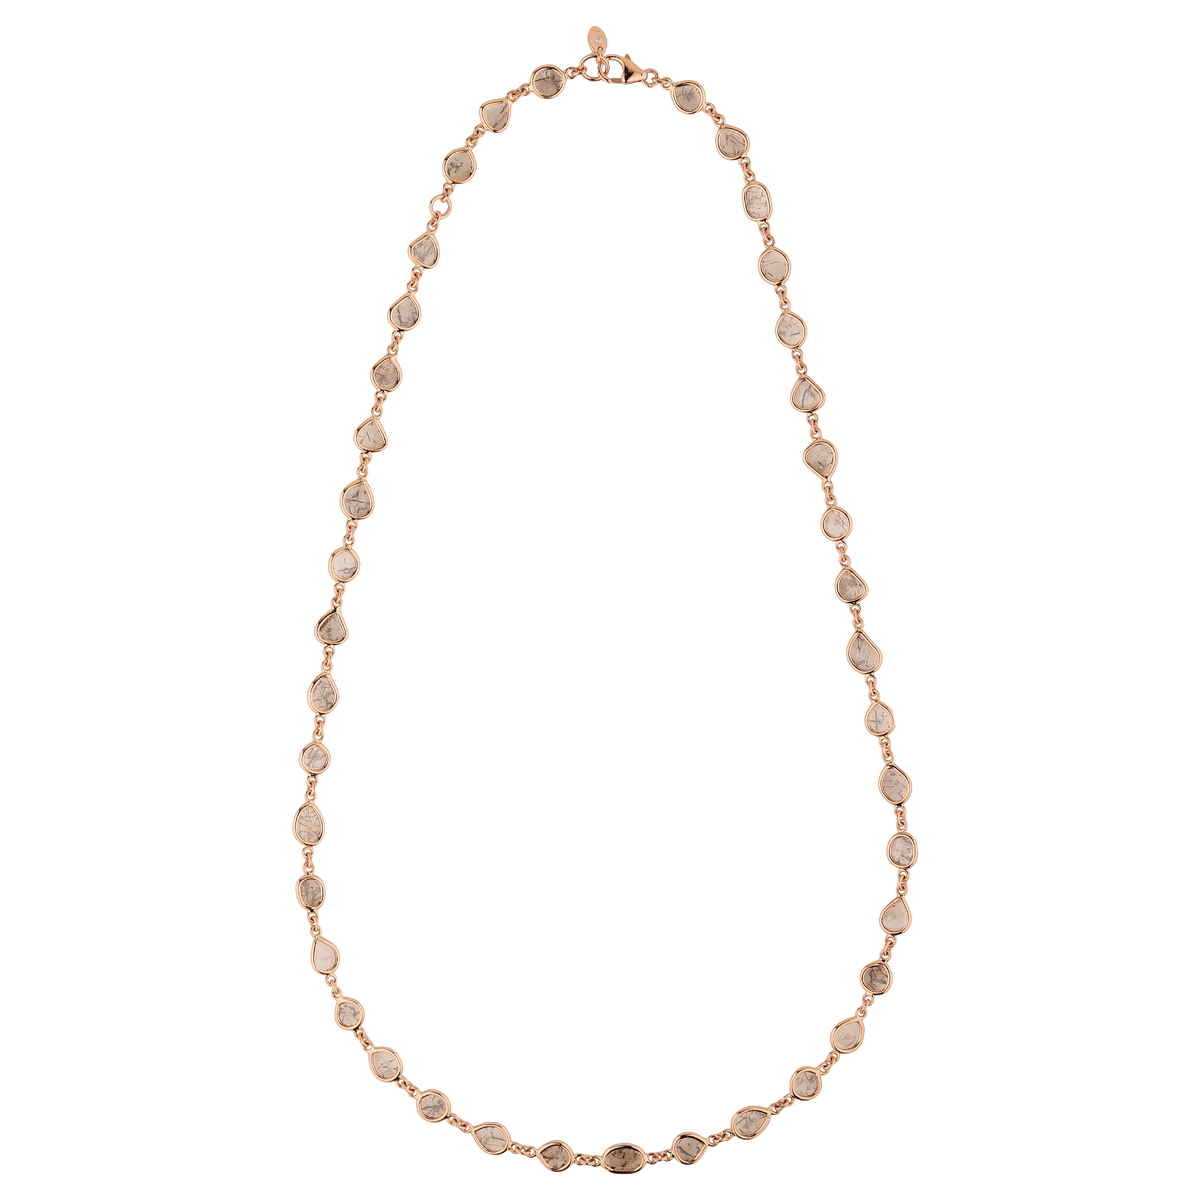 Diamond disc necklace with rose gold